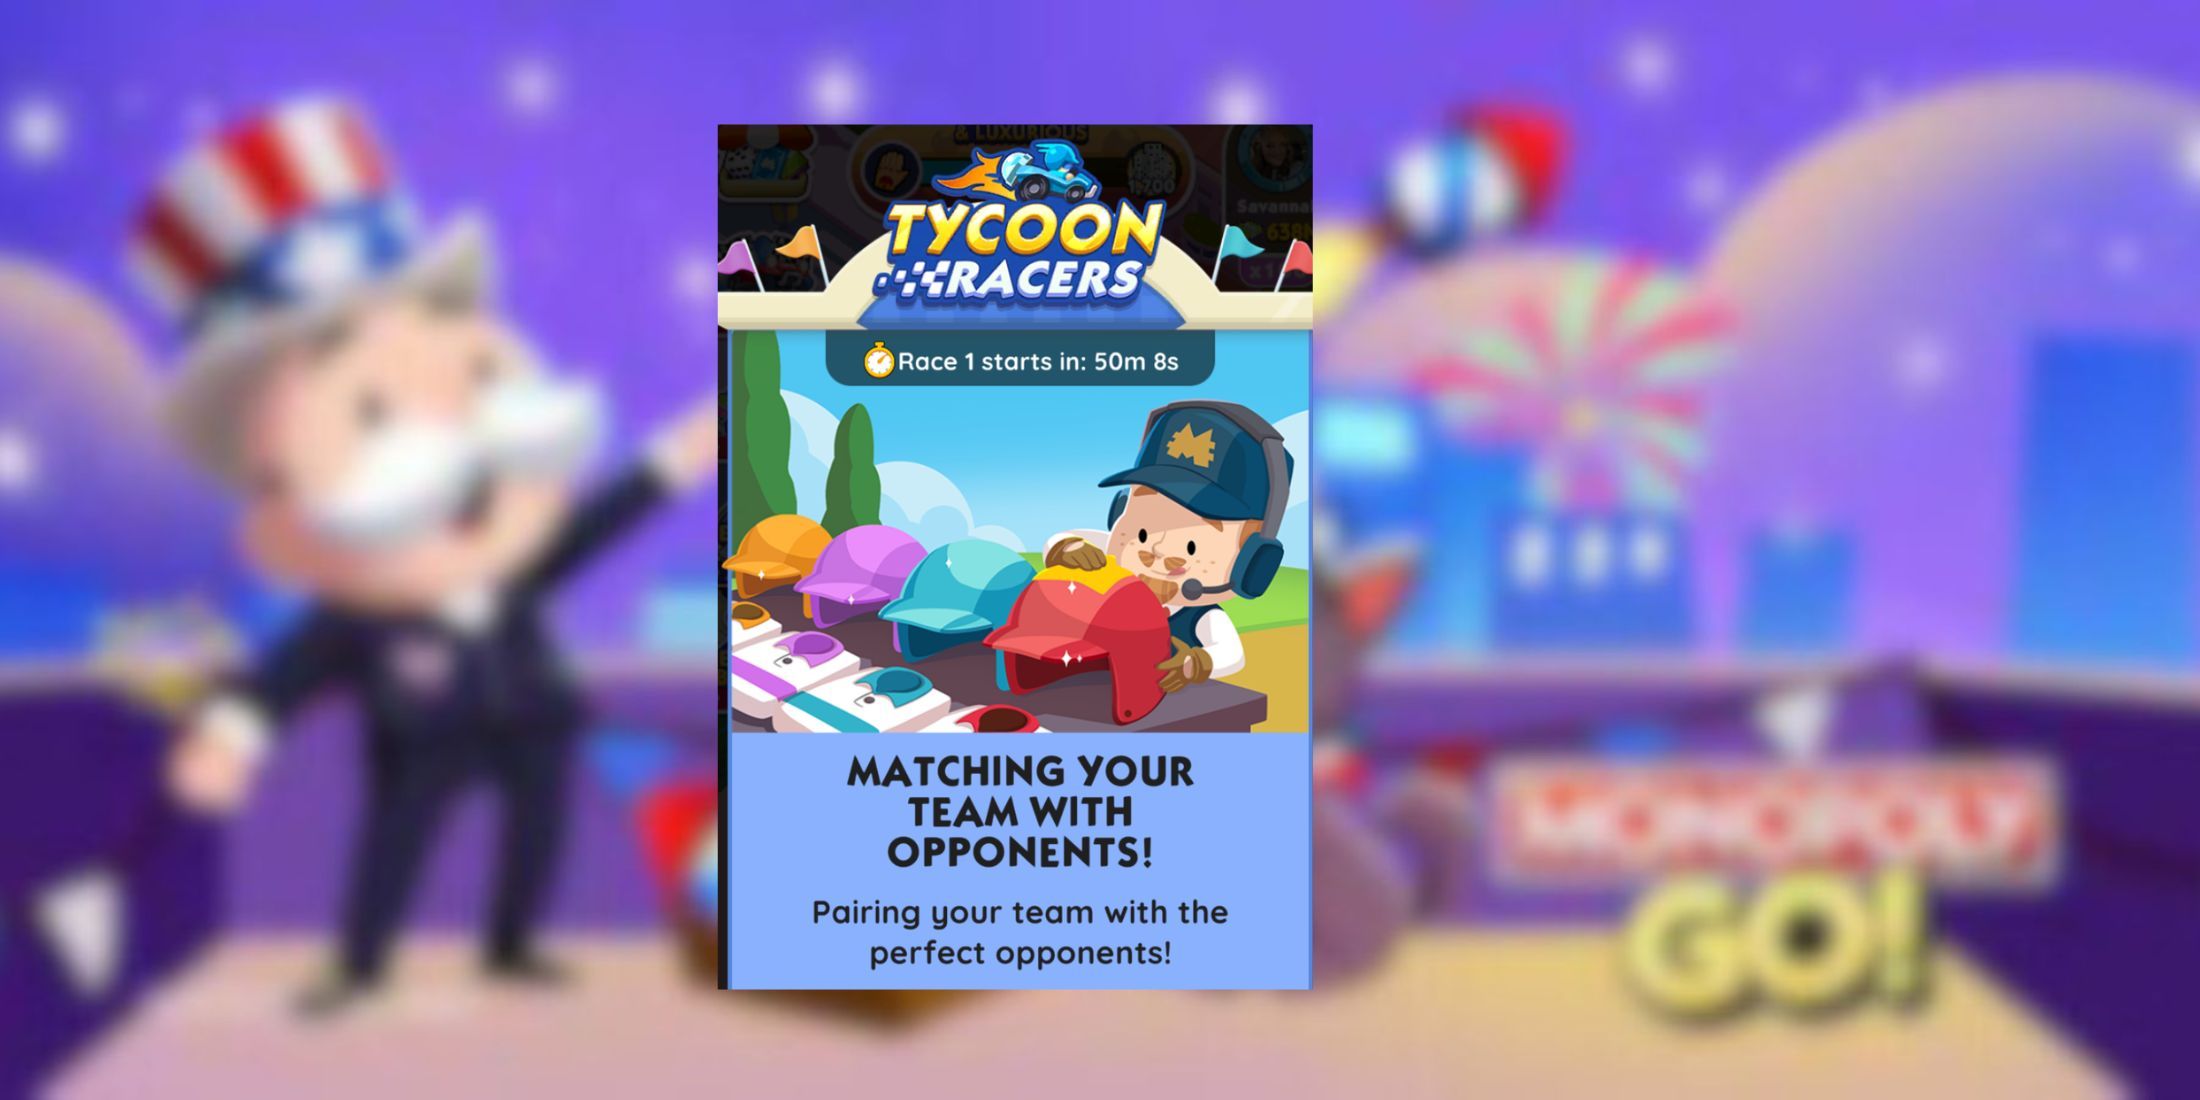 The Tycoon Racers event in Monopoly GO